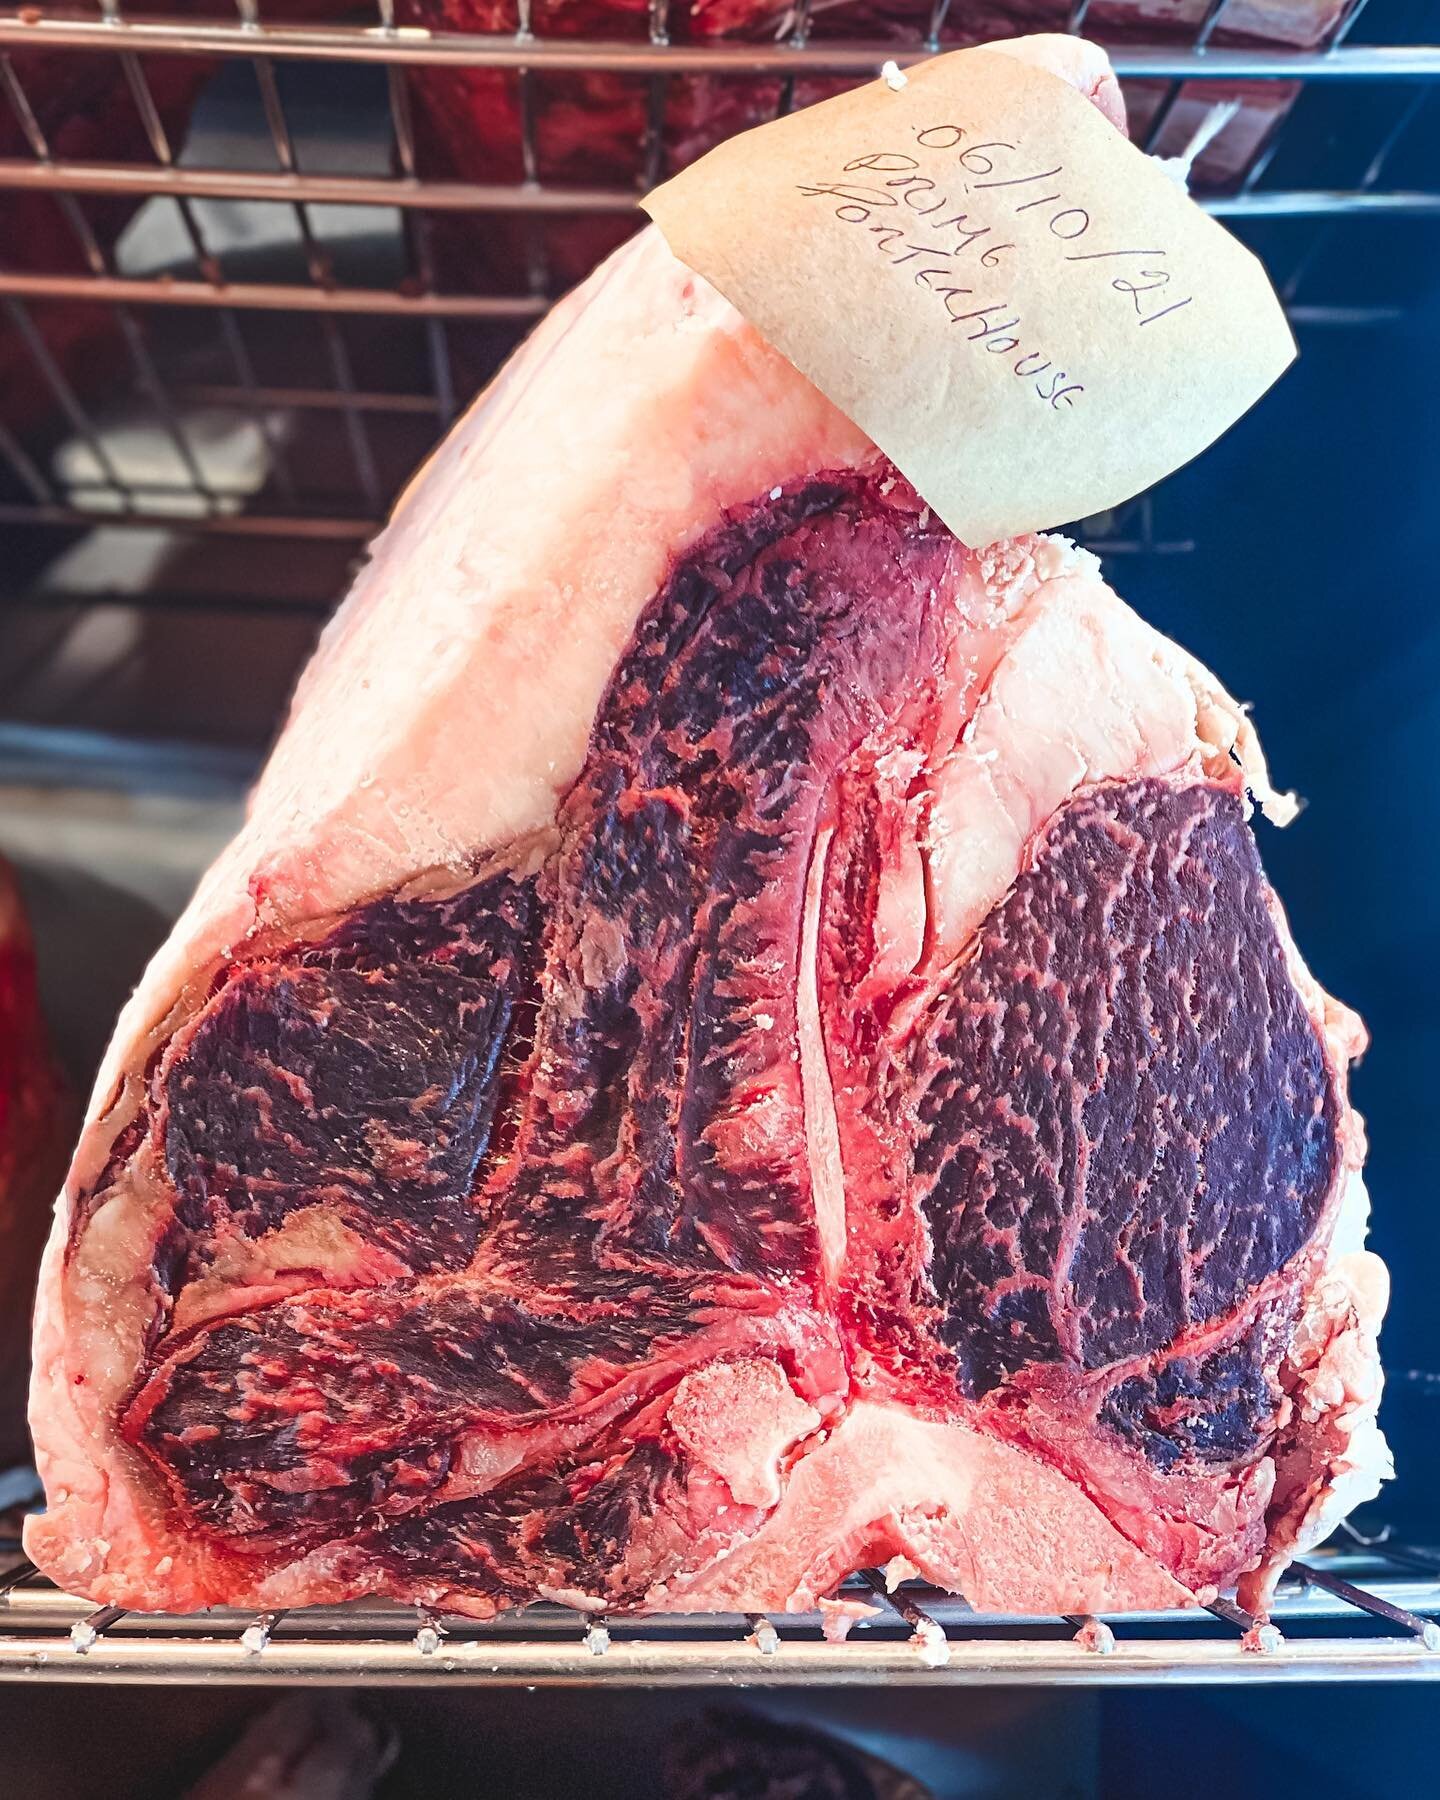 Bring Dad in to meat his match 🥩 Our Dry Aged Case in Freehold is 🔥 #mymarket 

#dryagedbeef #dryagedsteak #fathersday #dadsday #livotisfreehold #butchershop